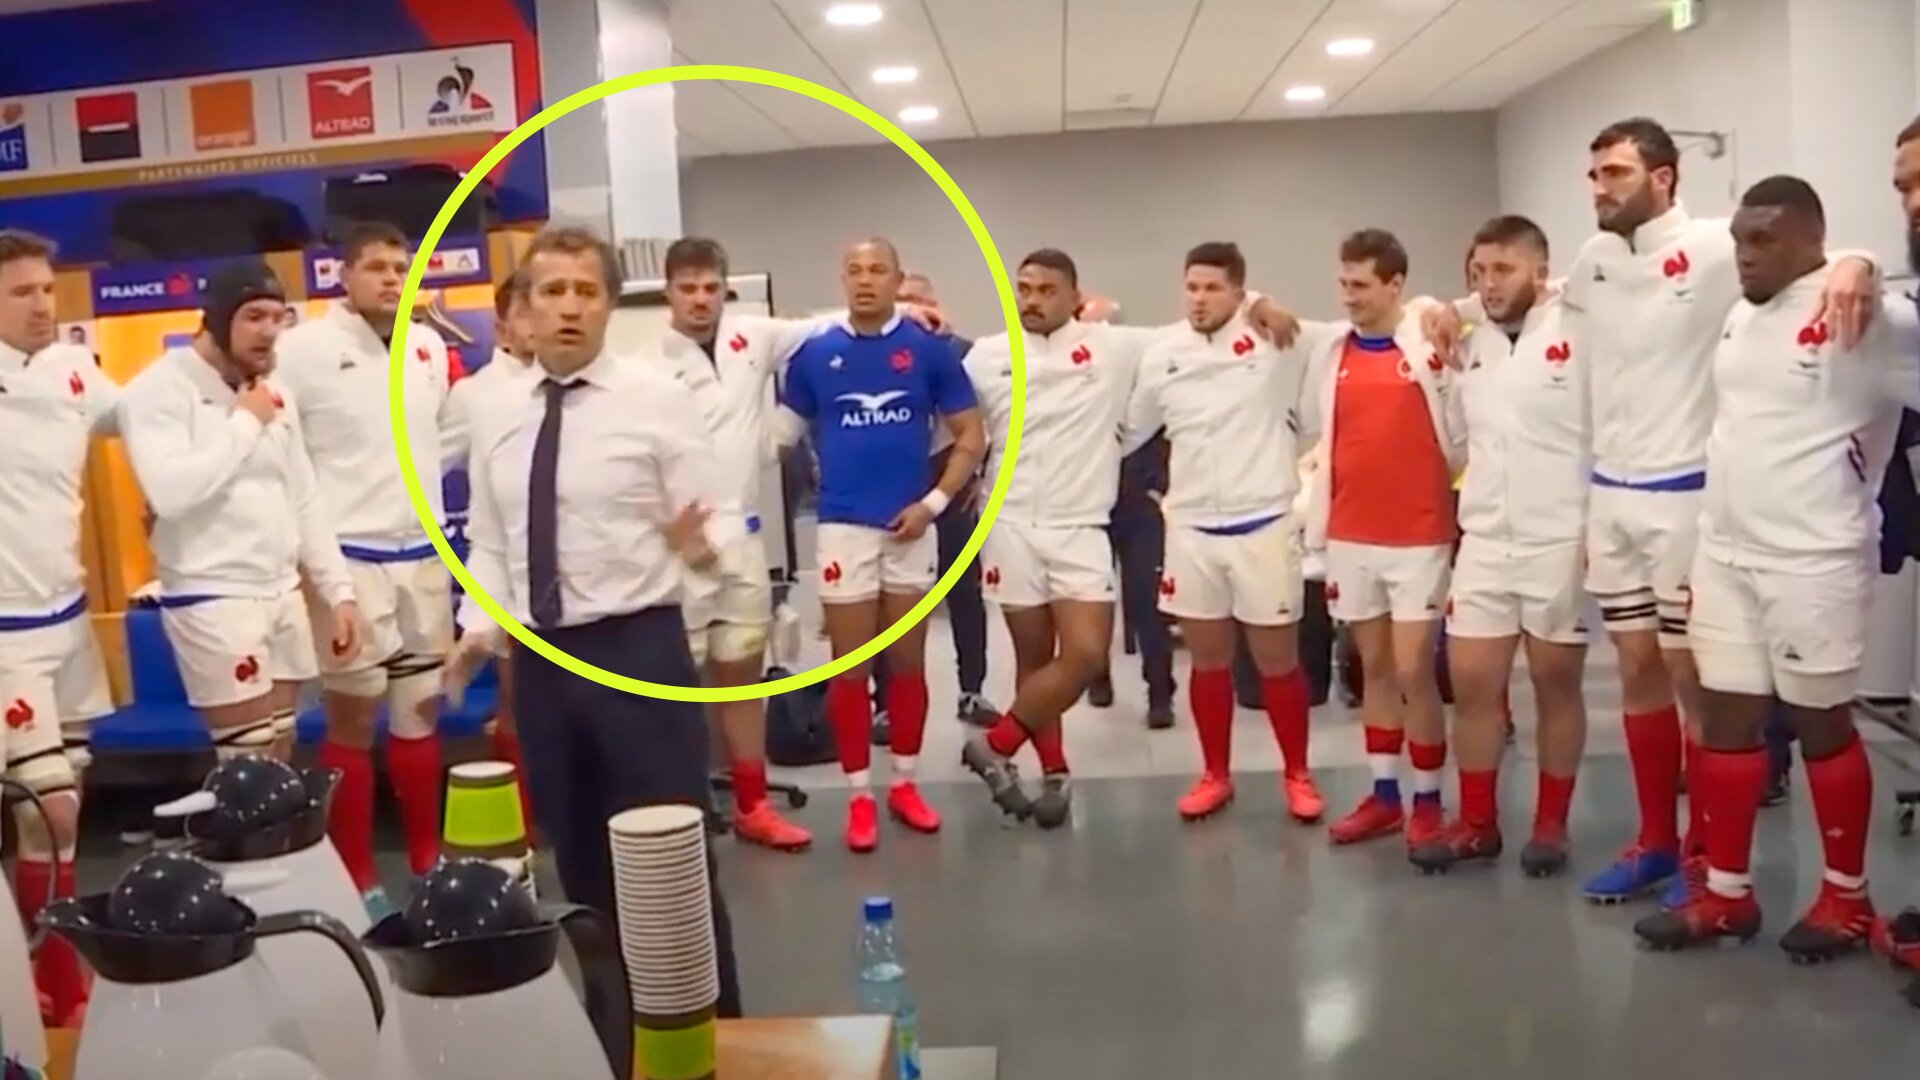 ‘Stand there you fat pig!’ - New video reveals the bizarre 'bullying' tactics of French coach, Fabien Galthie